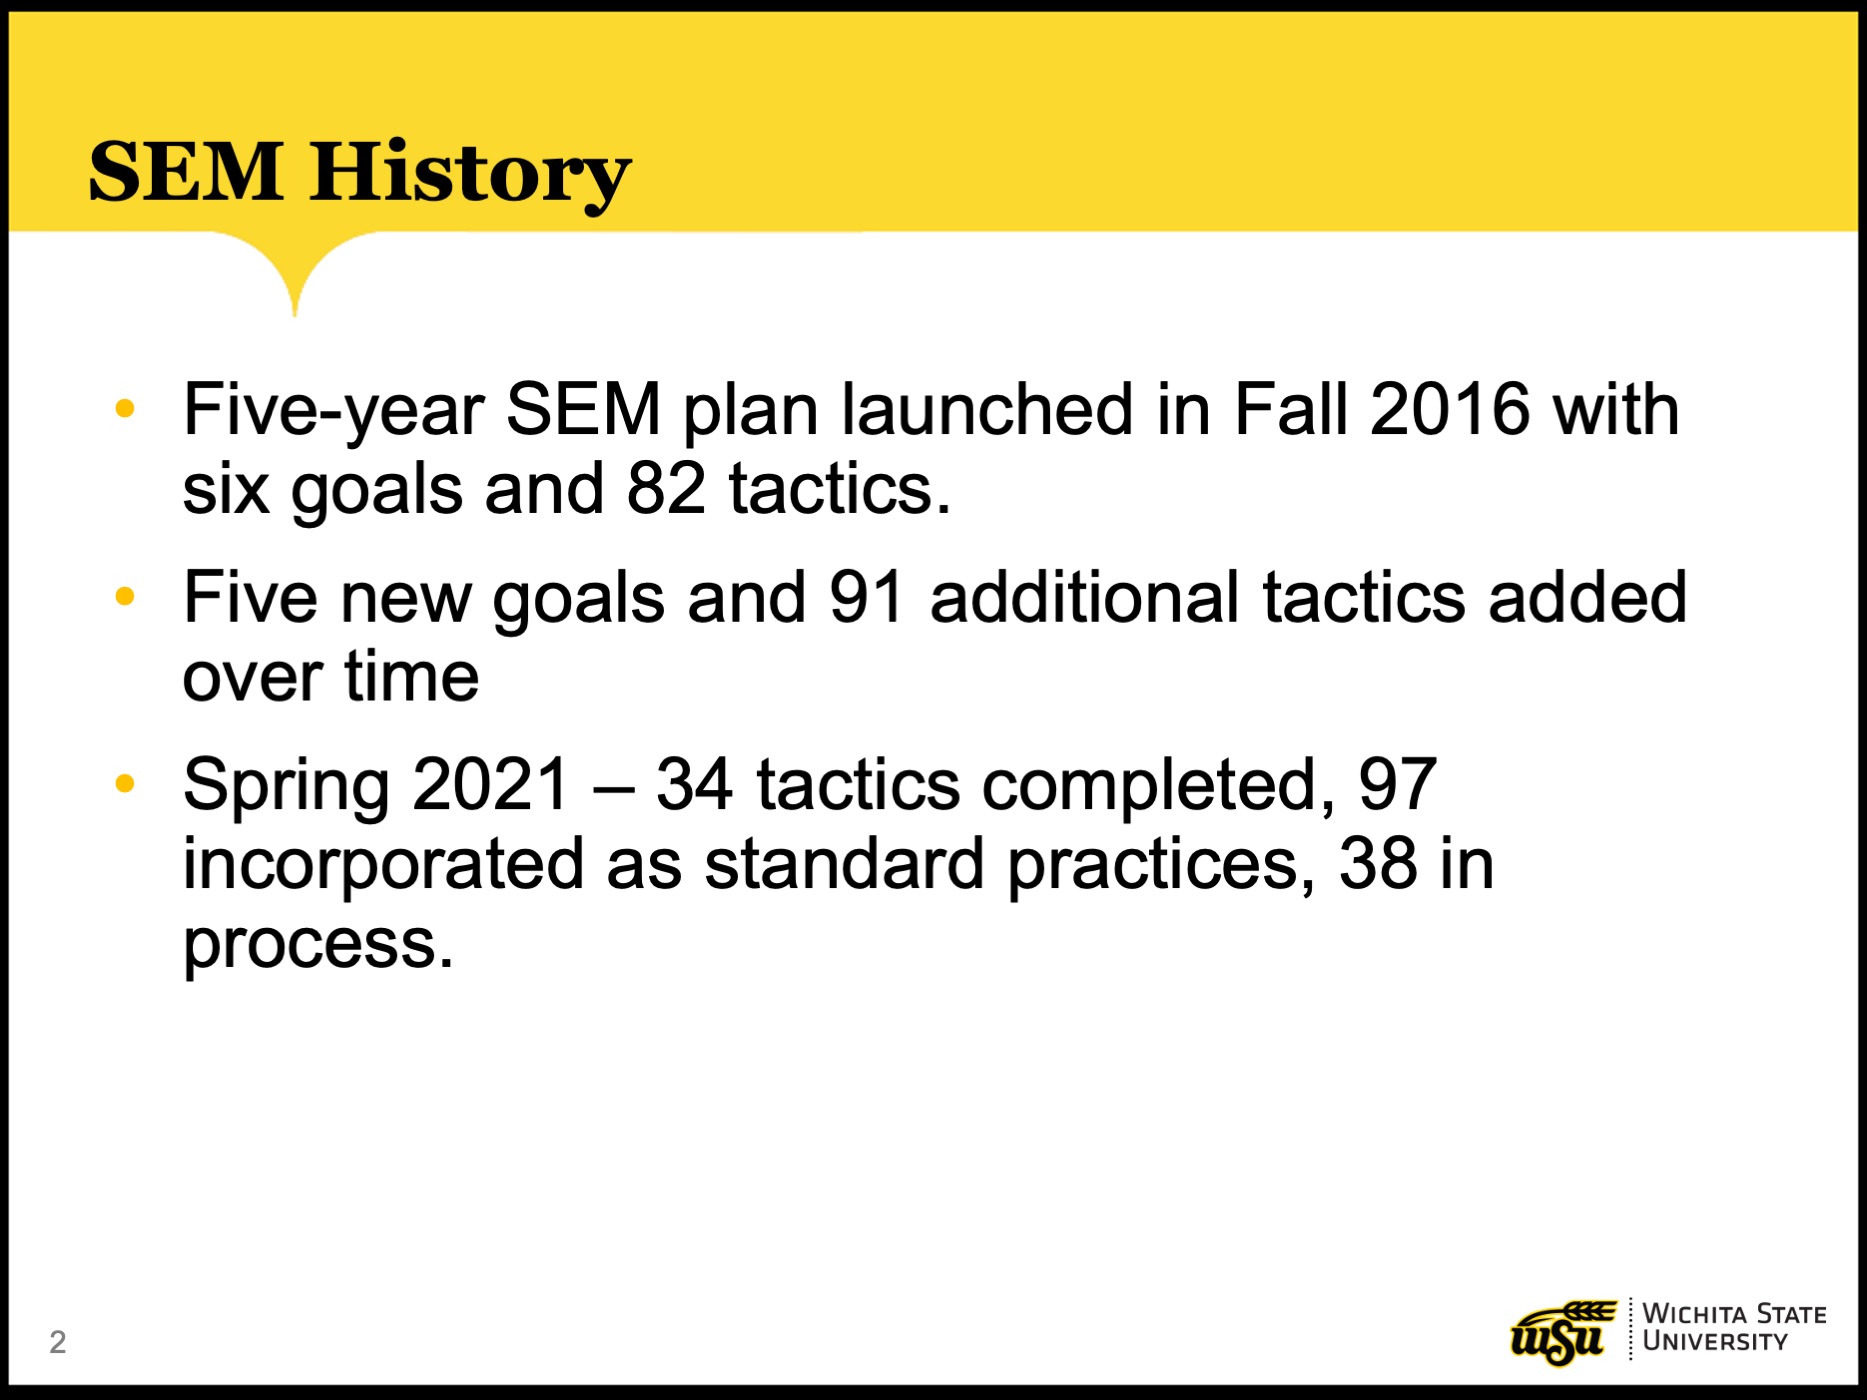 Slide titled, “SEM History.” Slide is comprised of three bulleted lines of text.    Line one is, “Five-year SEM plan launched in Fall 2016 with six goals and 82 tactics.”  Line two is, “Five new goals and 91 additional tactics added over time.”  Line 3 is, “Spring 2021 – 34 tactics completed, 97 incorporated as standard practices, 38 in process.”